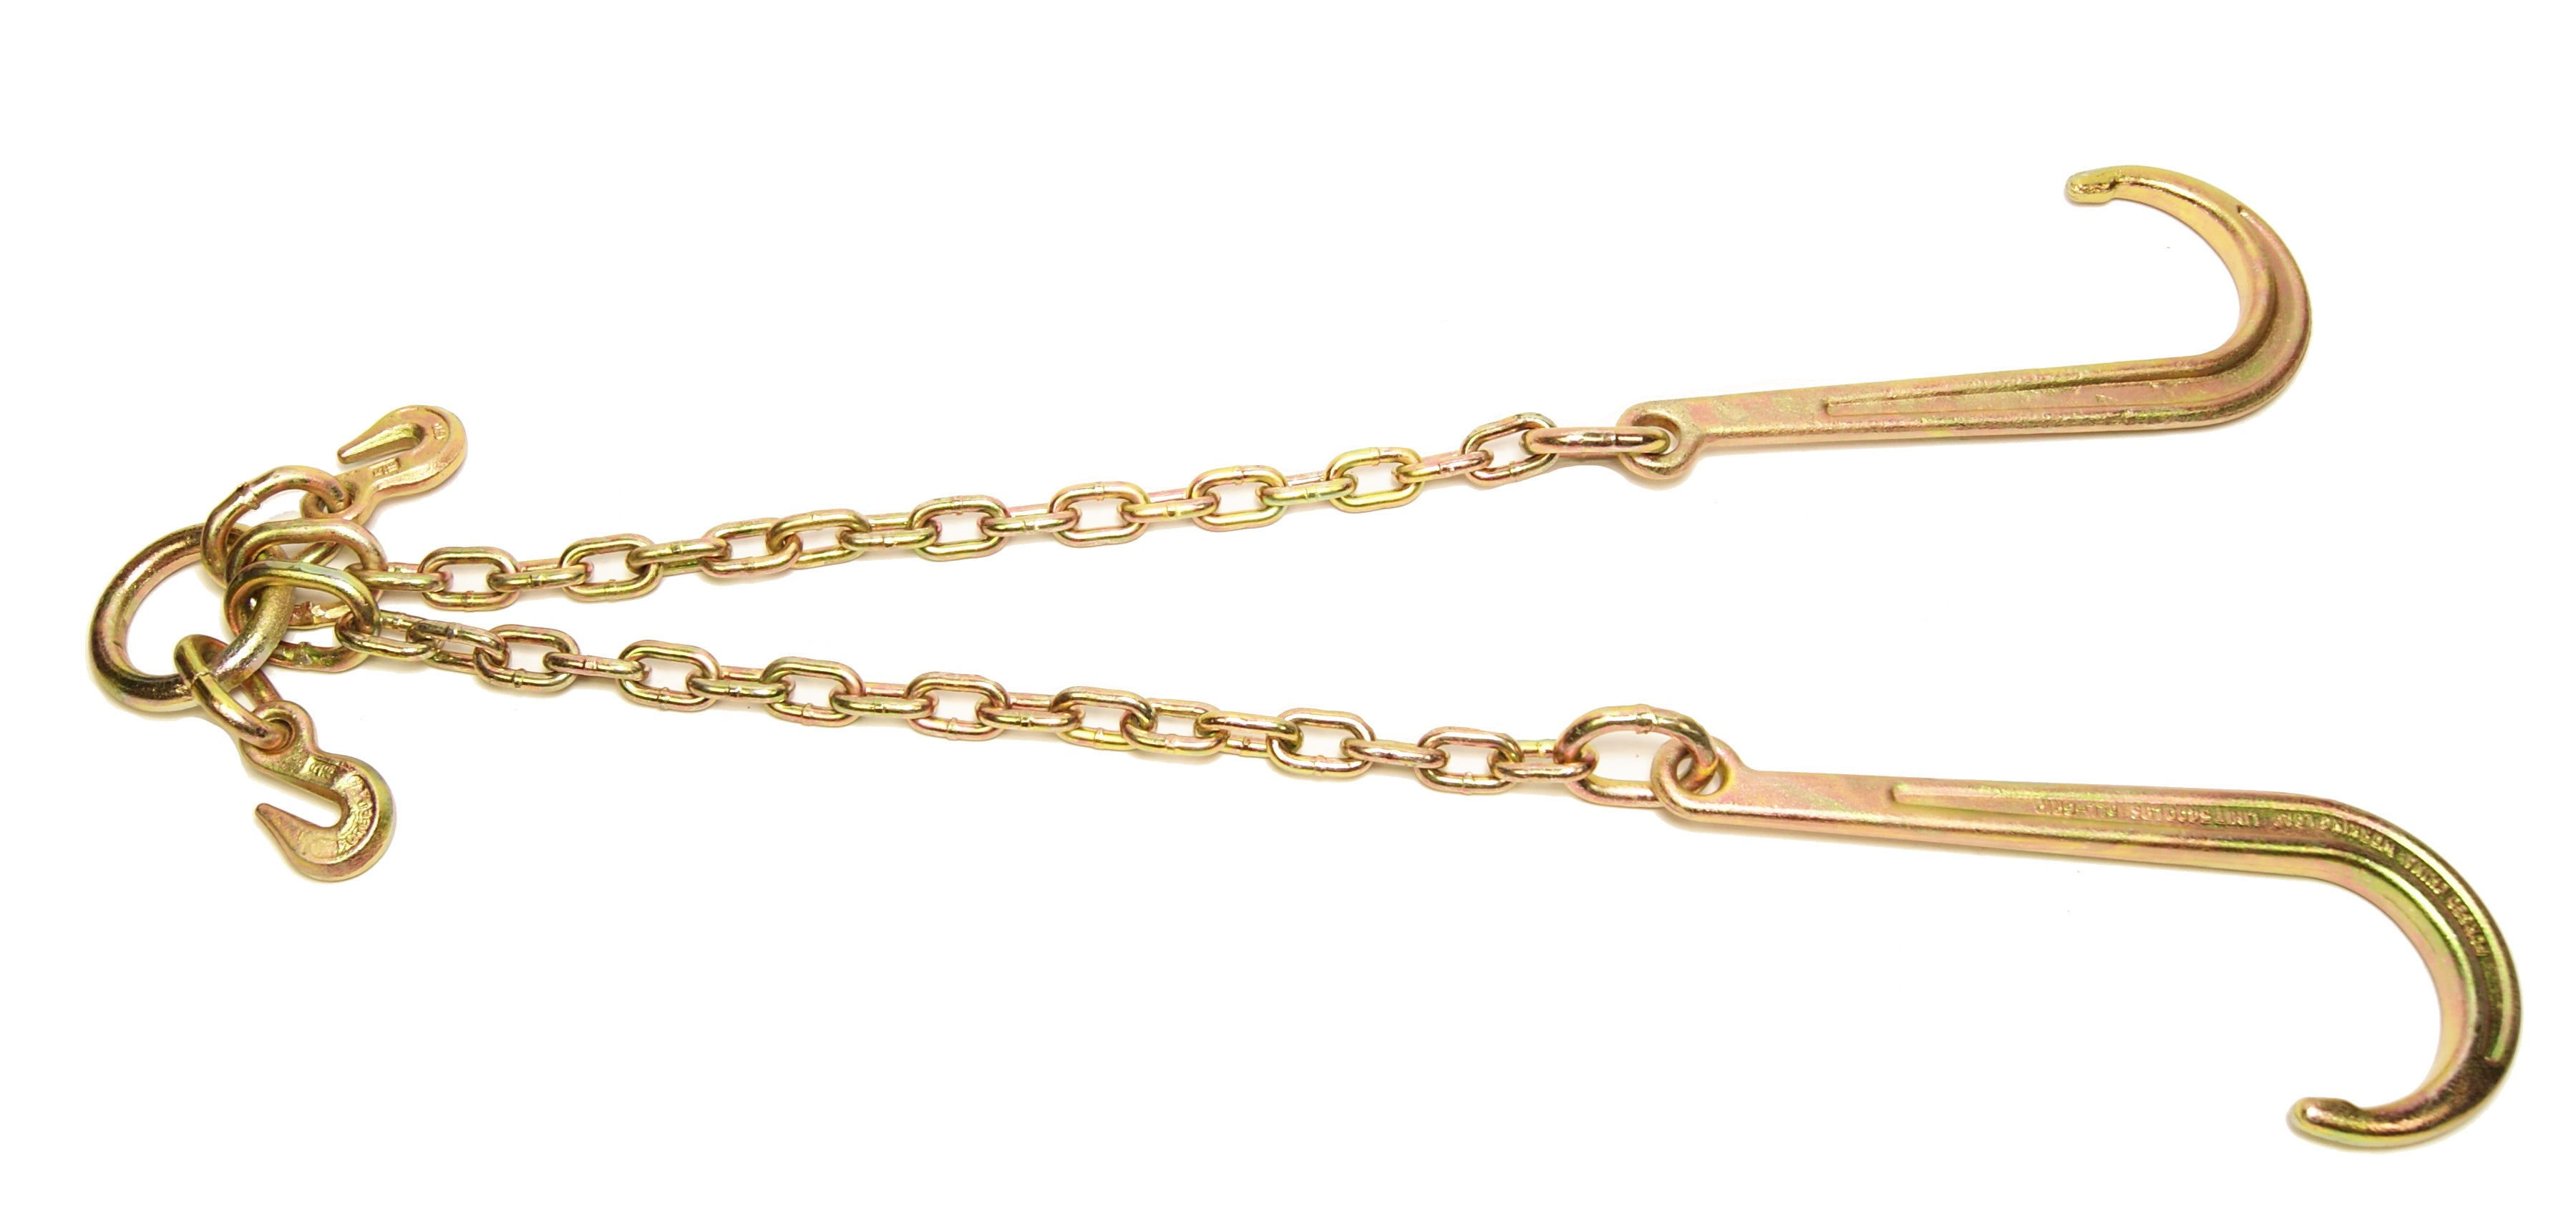 24" All-Grip Leg V-Bridle Tow Chain with 15" Long J Hooks each end.   V-Chain towing